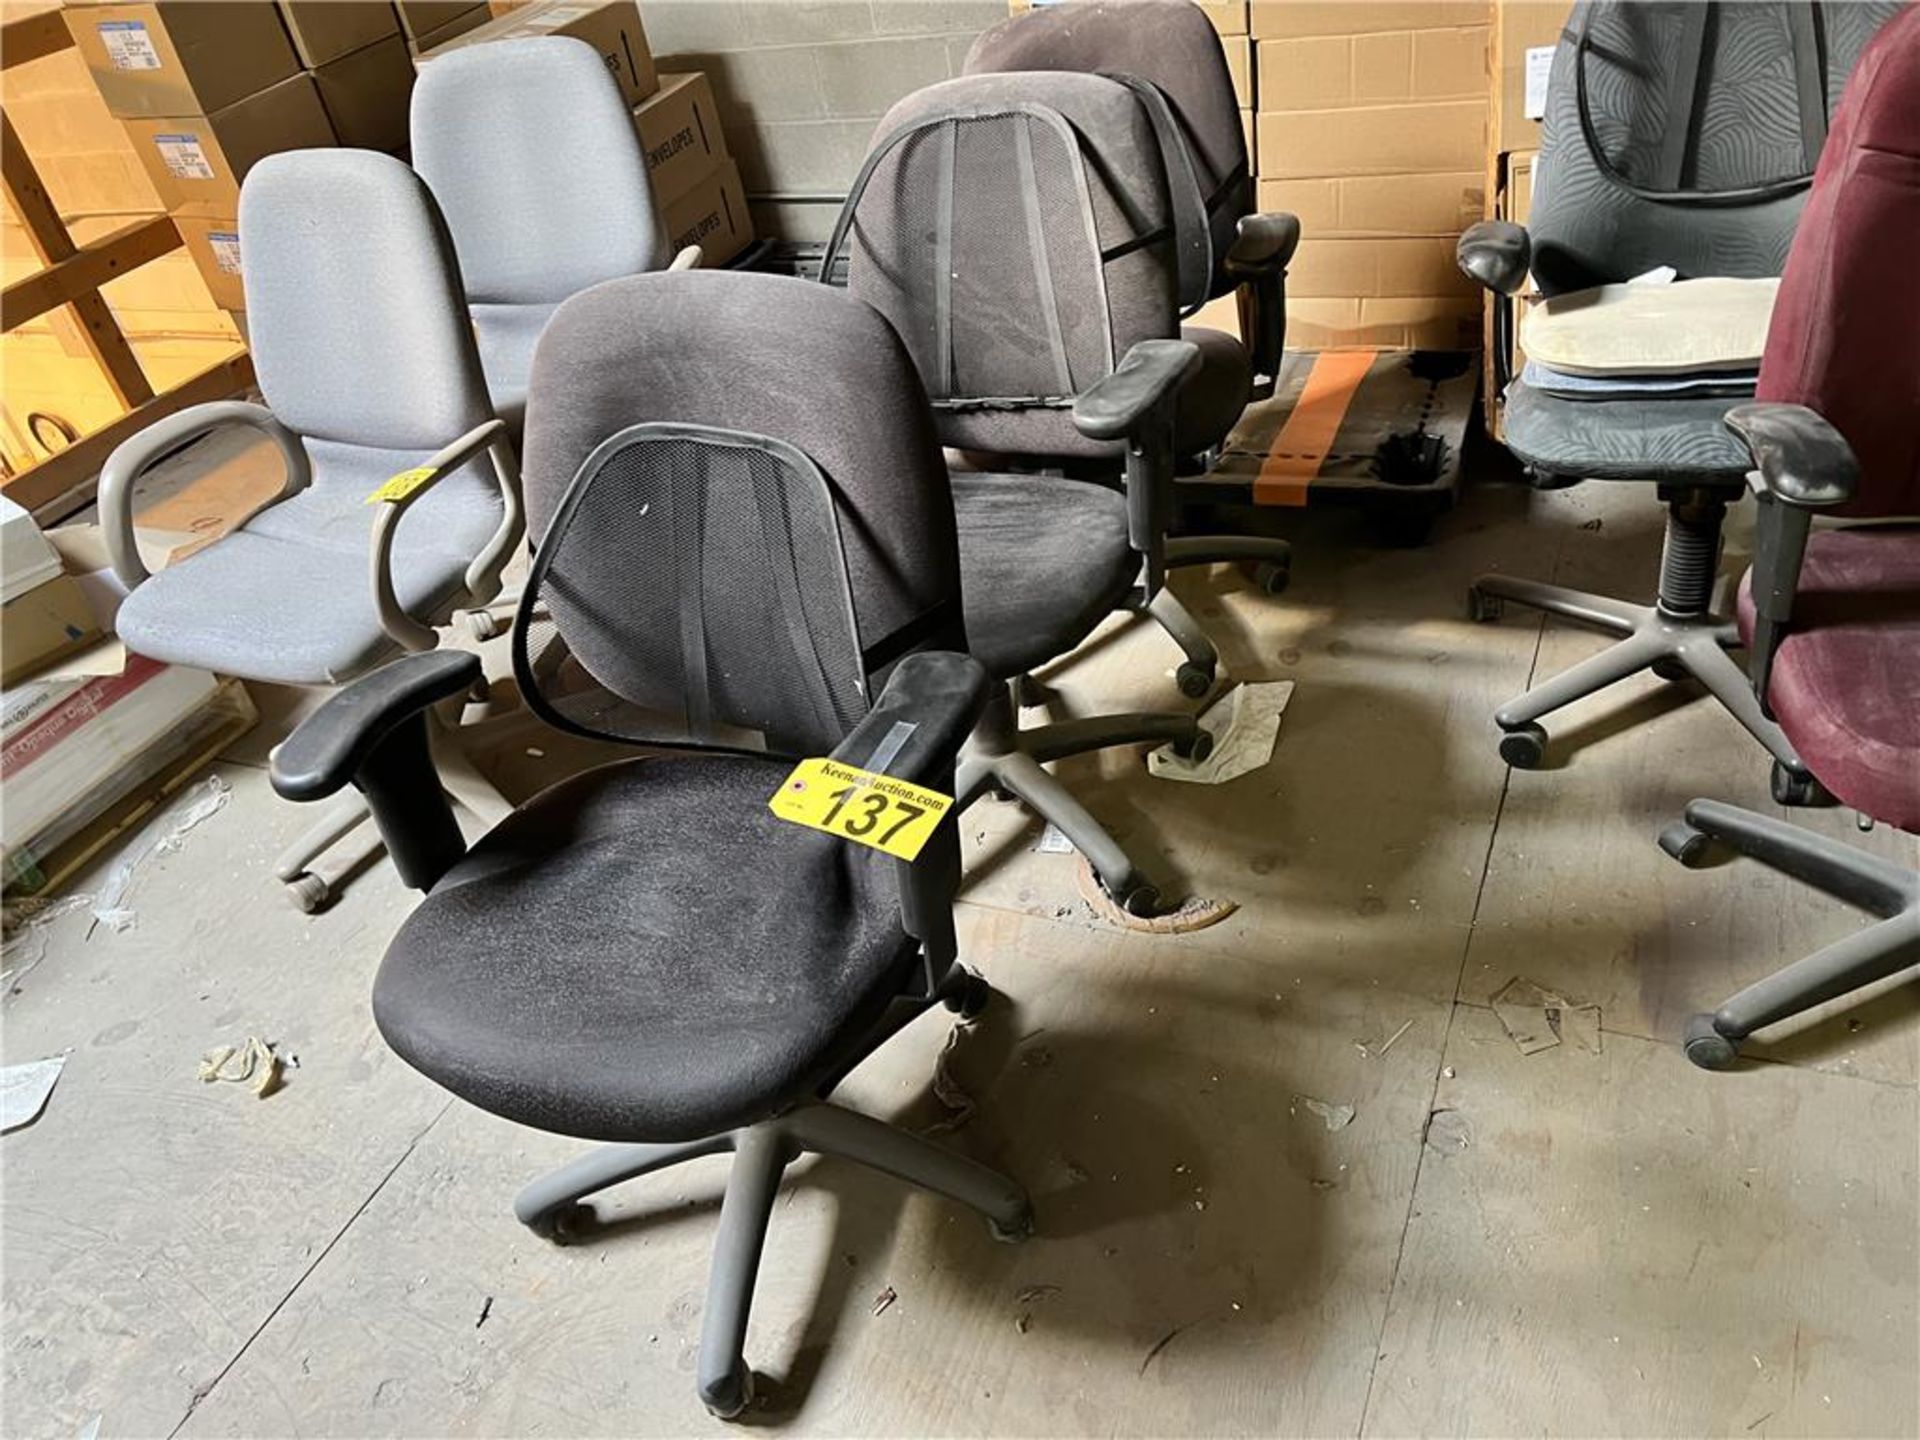 TIMES THE MONEY: (3) ASSORTED SWIVEL OFFICE CHAIRS WITH BACK SUPPORT PADS